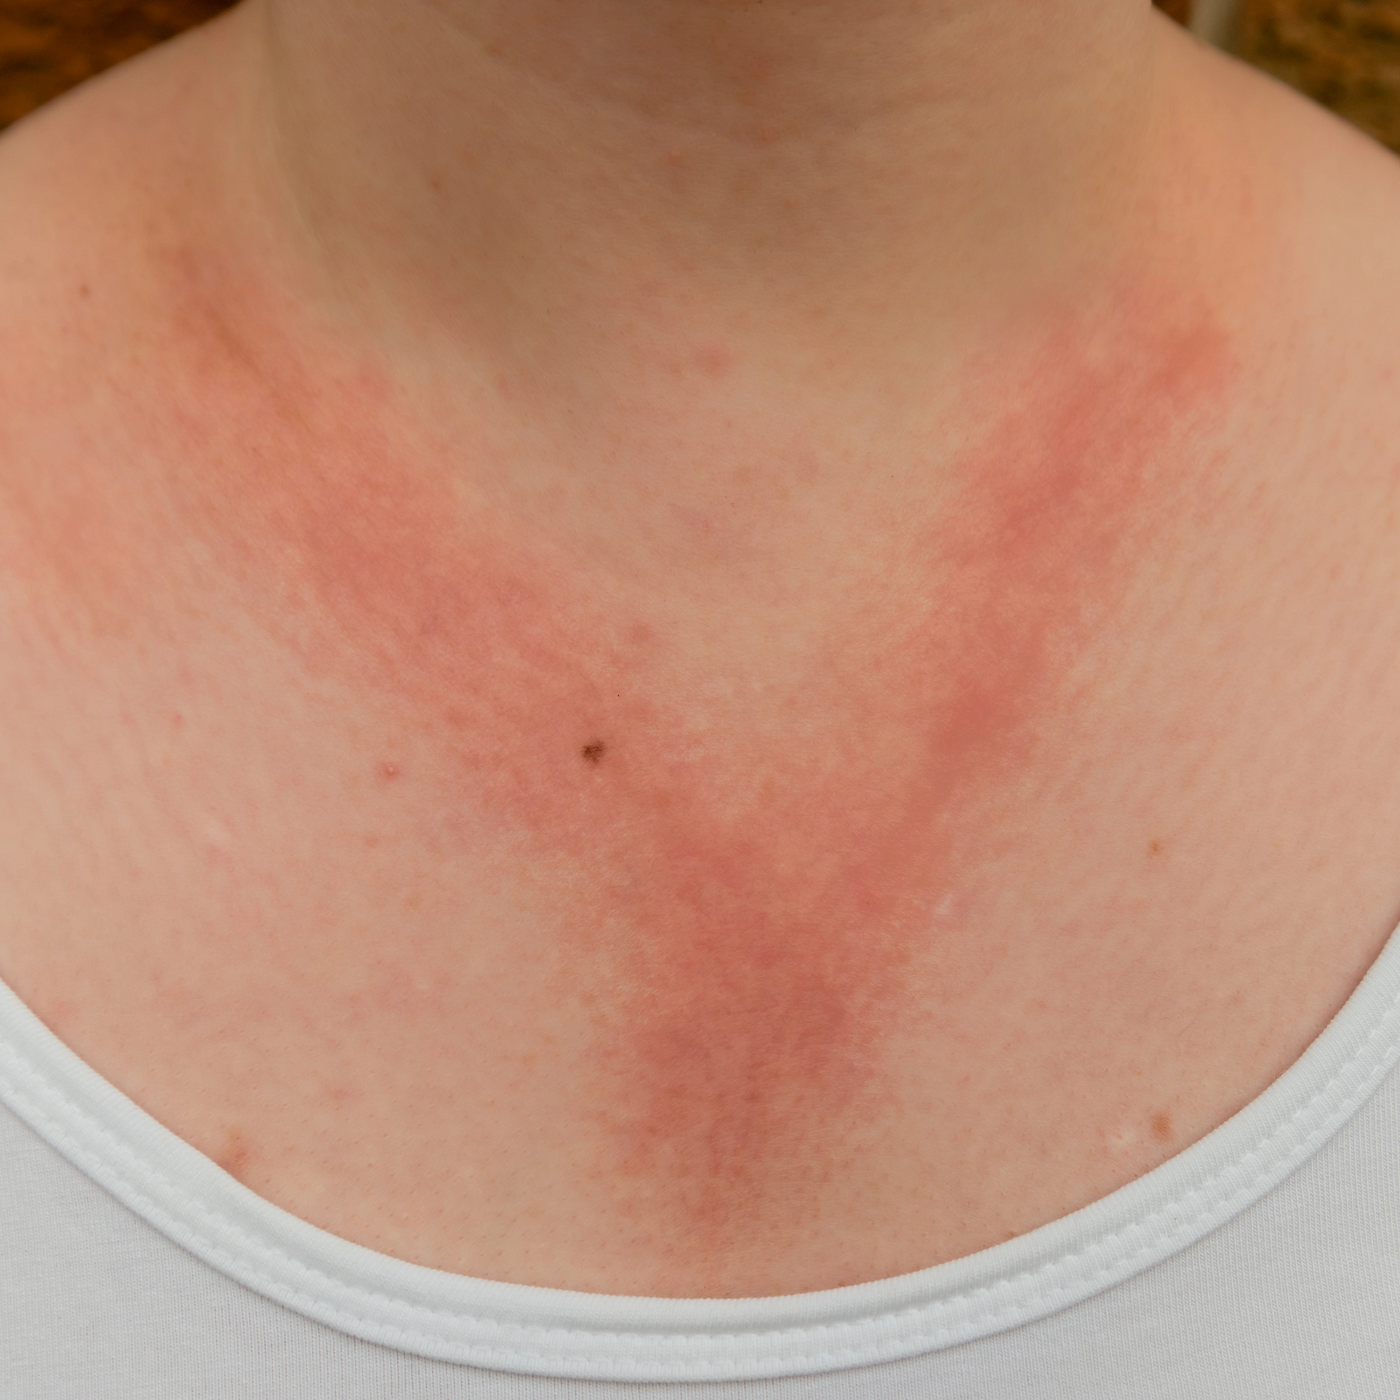 How to manage these common skin rashes?